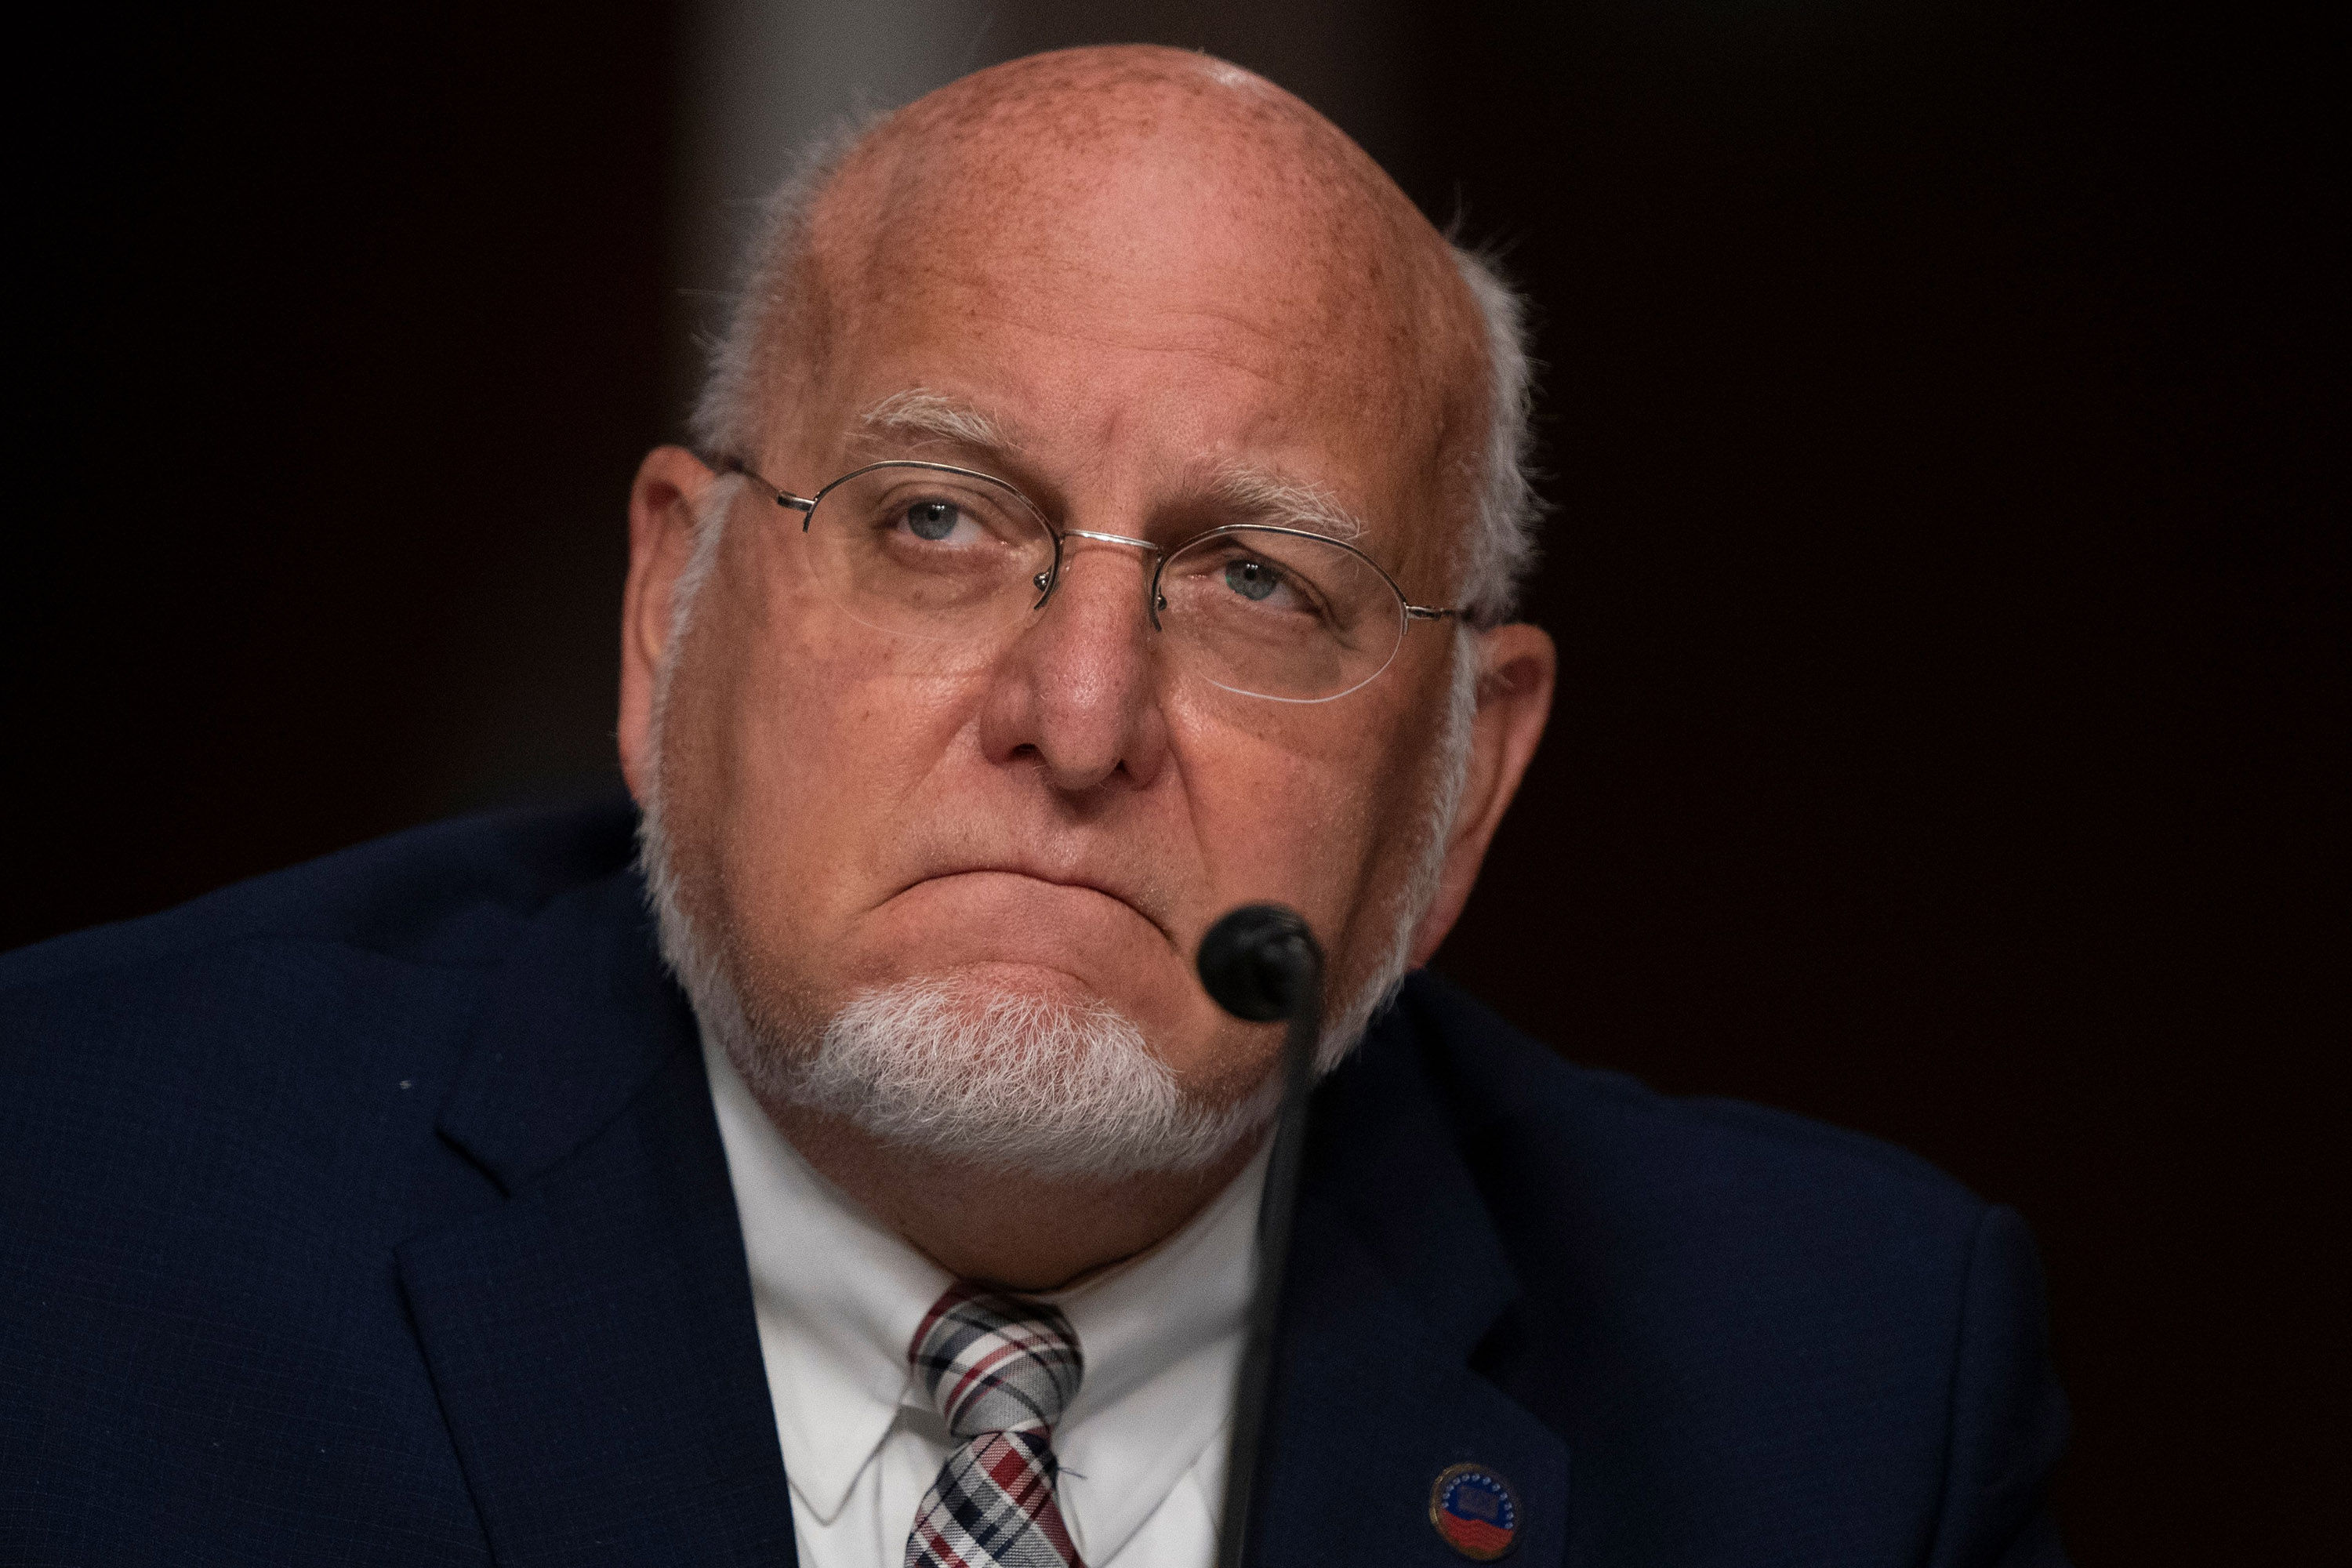 CDC Director Dr. Robert Redfield is pictured during a US Senate Health, Education, Labor, and Pensions Committee hearing in Washington, DC, on September 23.